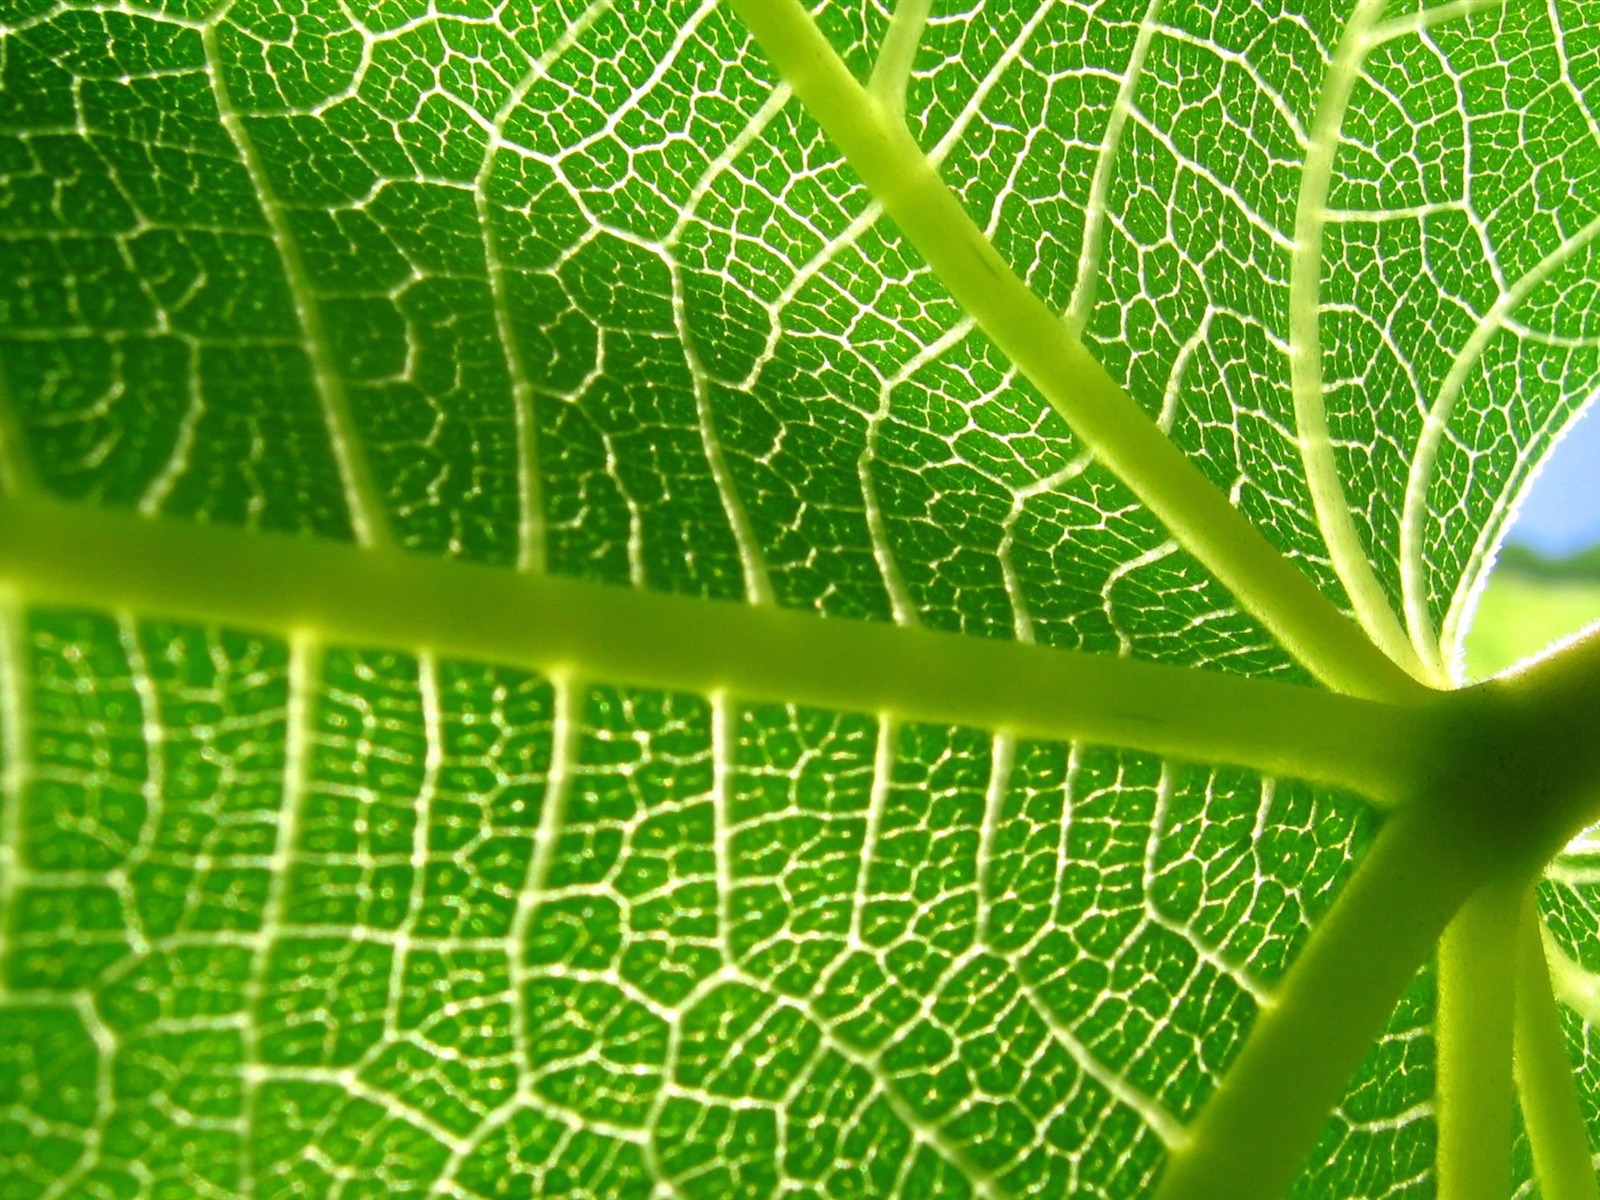 Large green leaves close-up flower wallpaper (2) #13 - 1600x1200